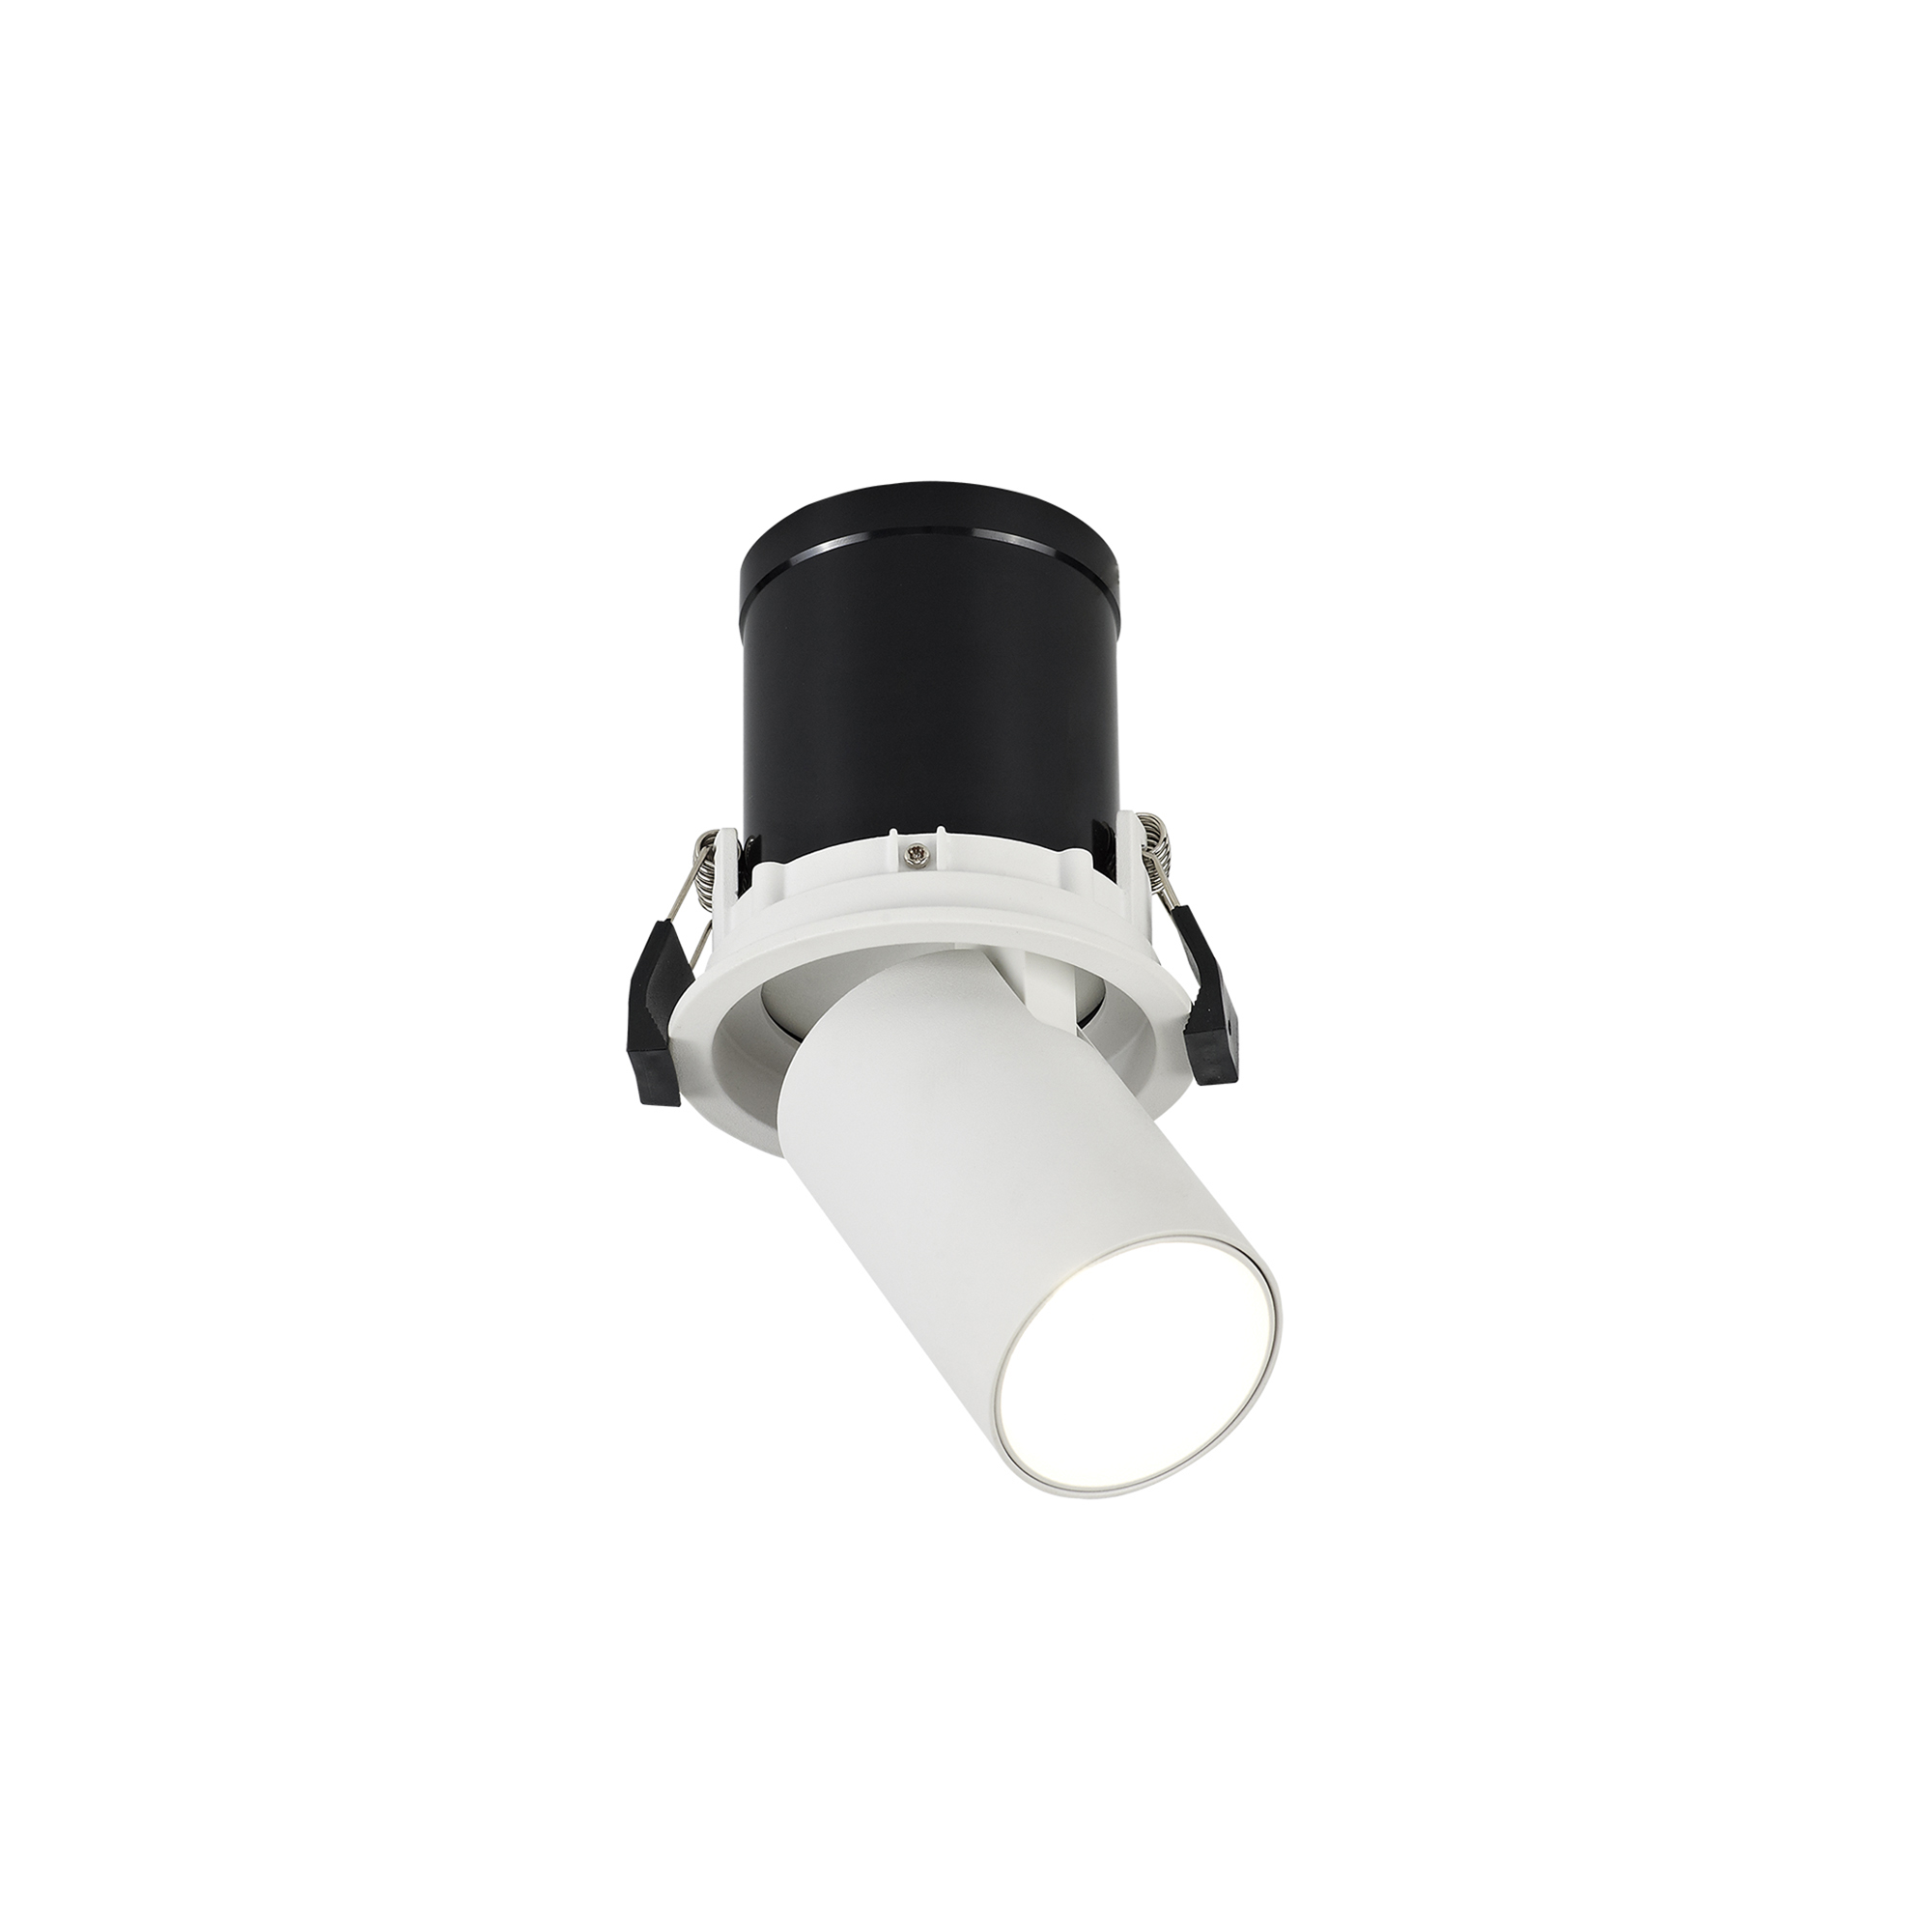 DX200373  Barda Retractable Recessed Swivel Round Spotlight; 8W; 4000K; 24°;585lm;White & White; Dia: 85mm Cut Out 75mm; 3yrs Warranty